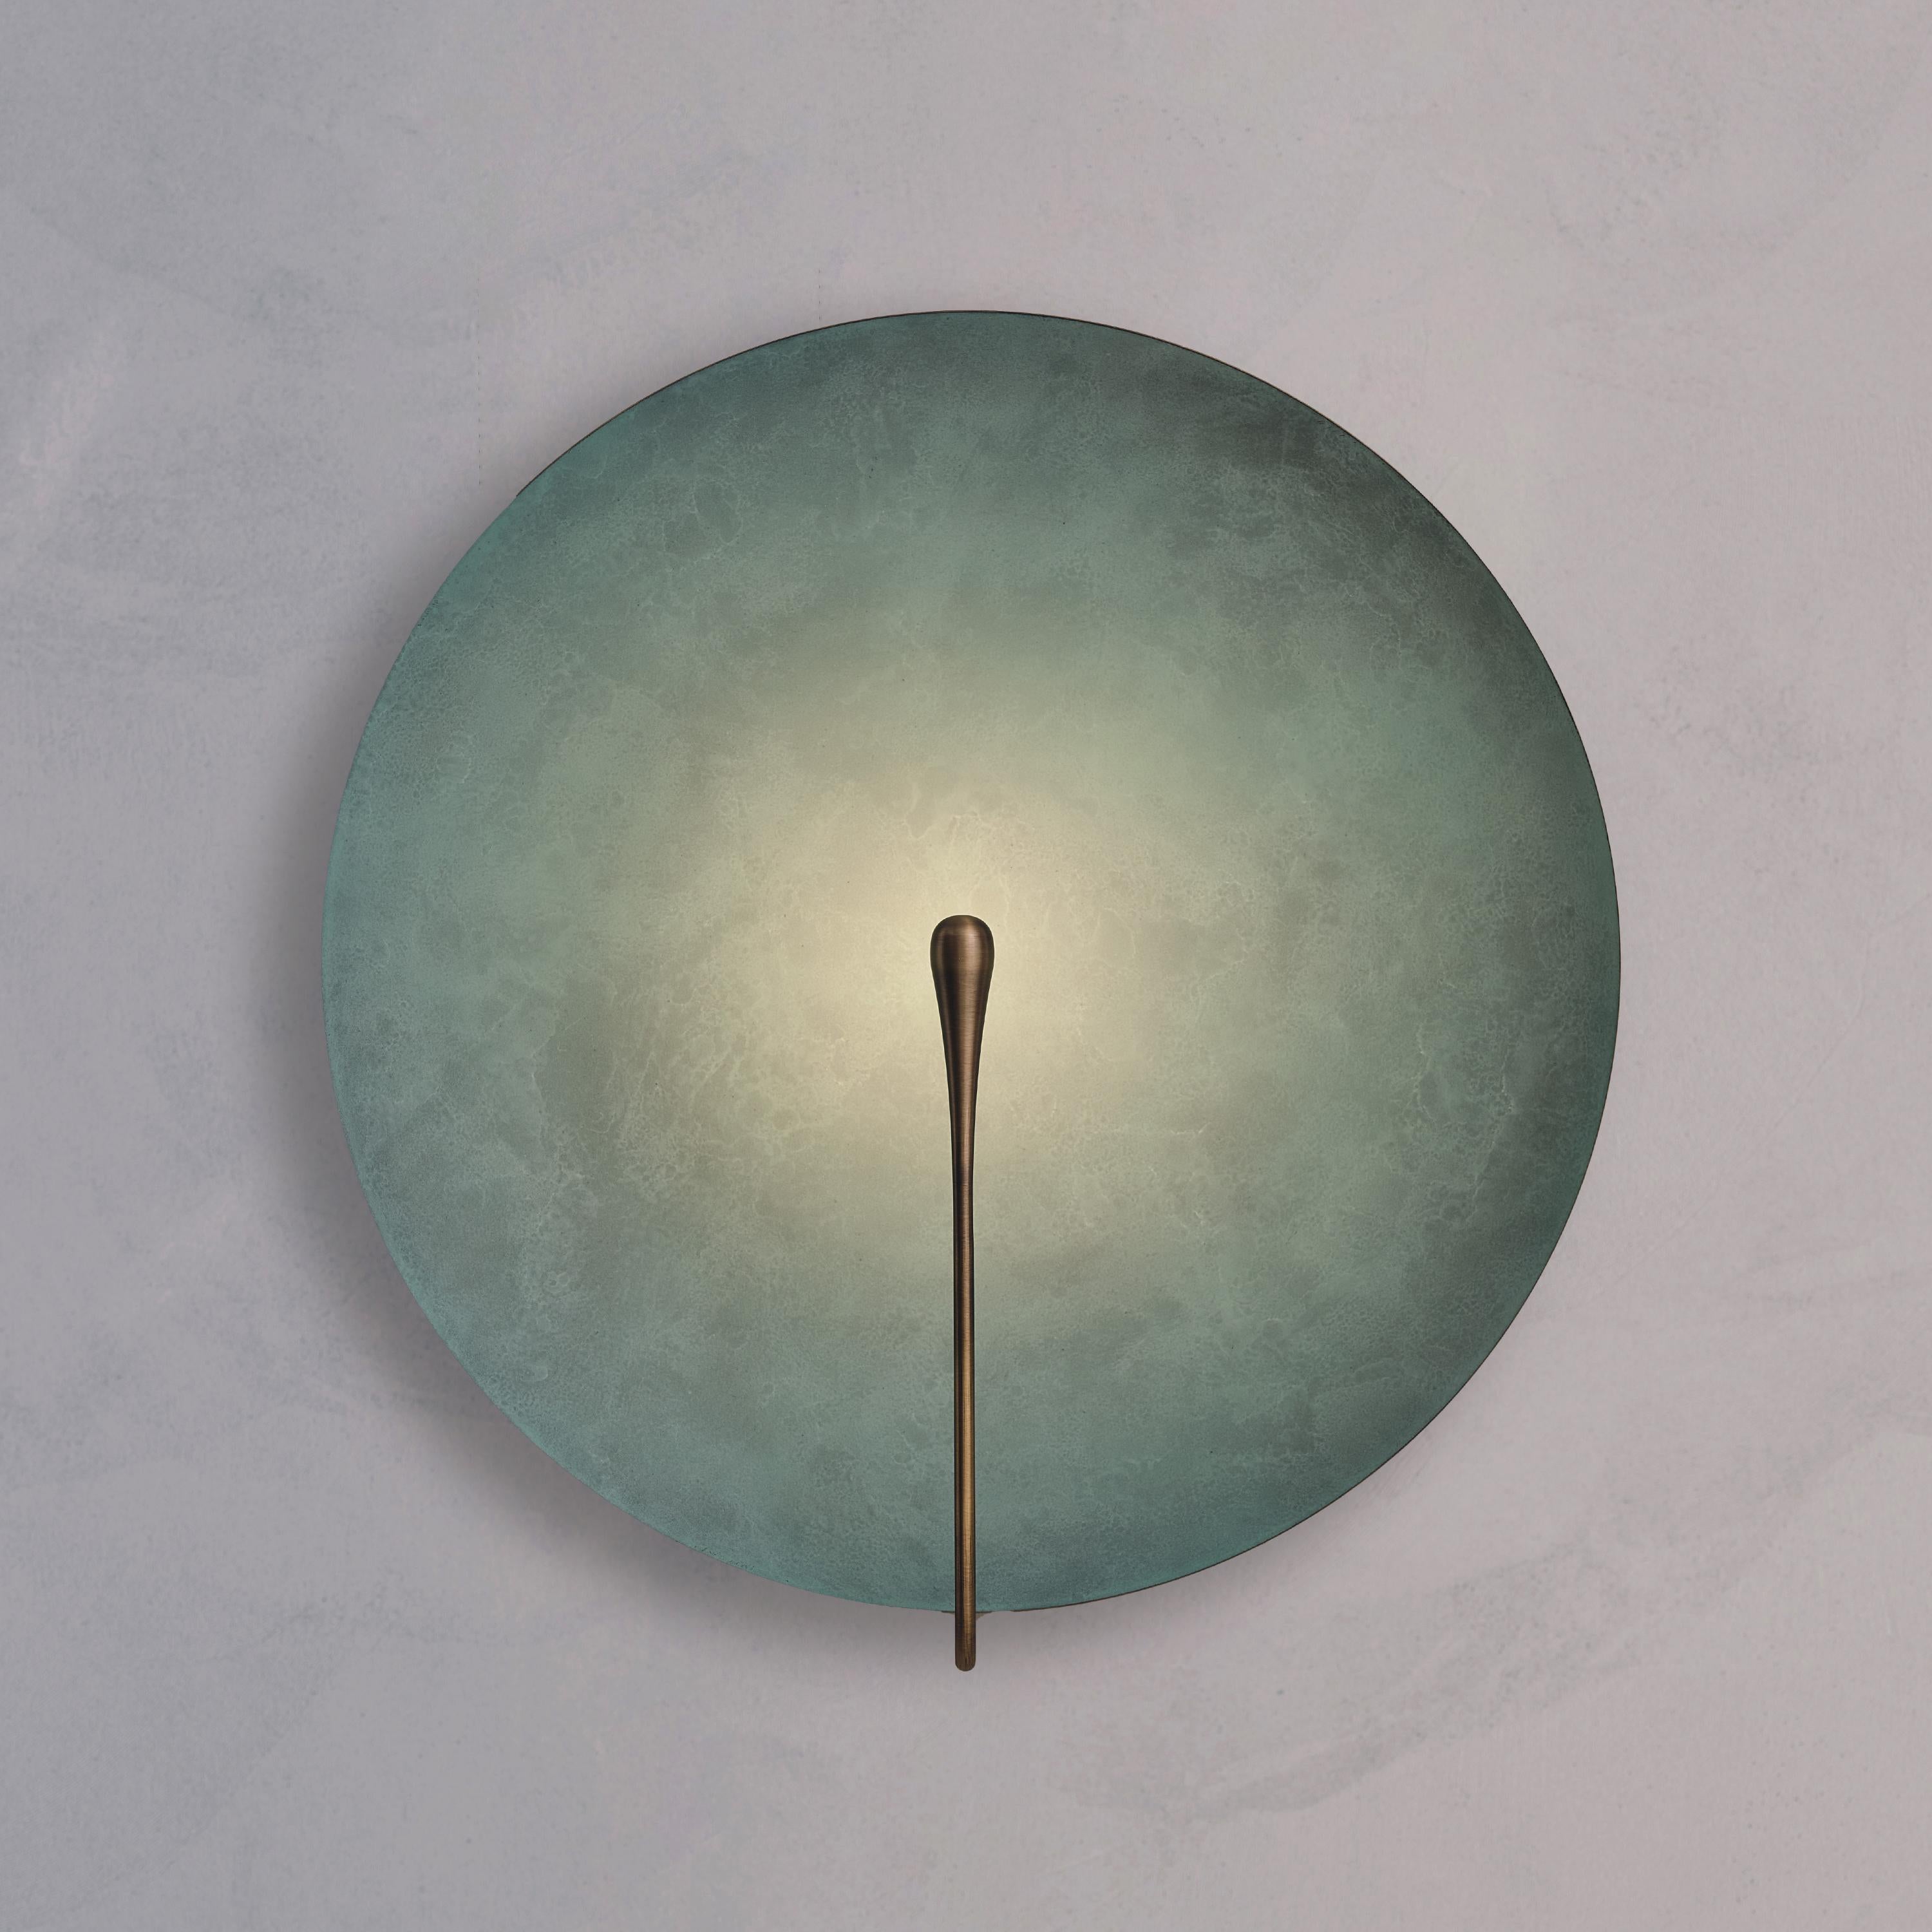 Inspired by the beautiful textures of nature, a 'Verdigris' patina is applied on a hand-spun brass plate to create this unique finish. Please note that each piece is individually handmade, therefore unique in its own way.
 
Softly illuminated with